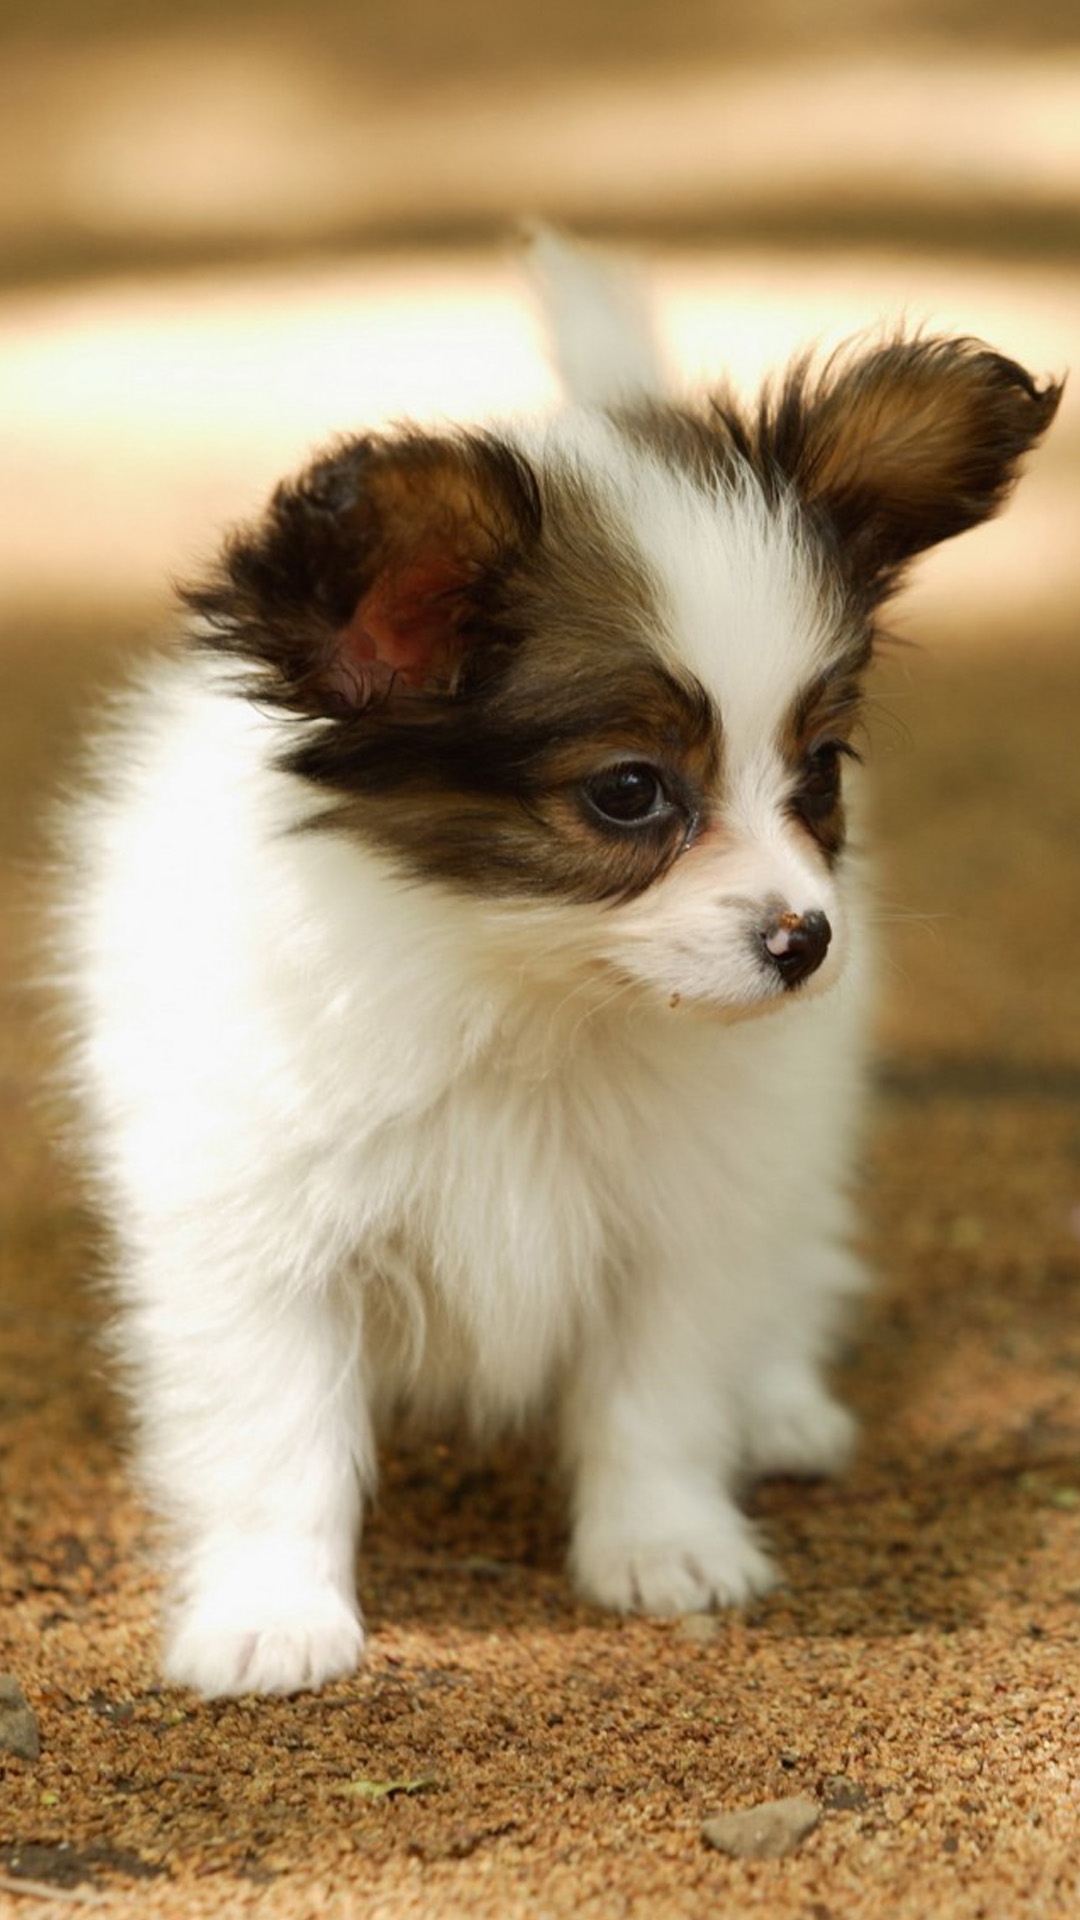 Cute-Lovely-Puppy-Walking-Dog-Animal-iPhone-6-wallpaper.